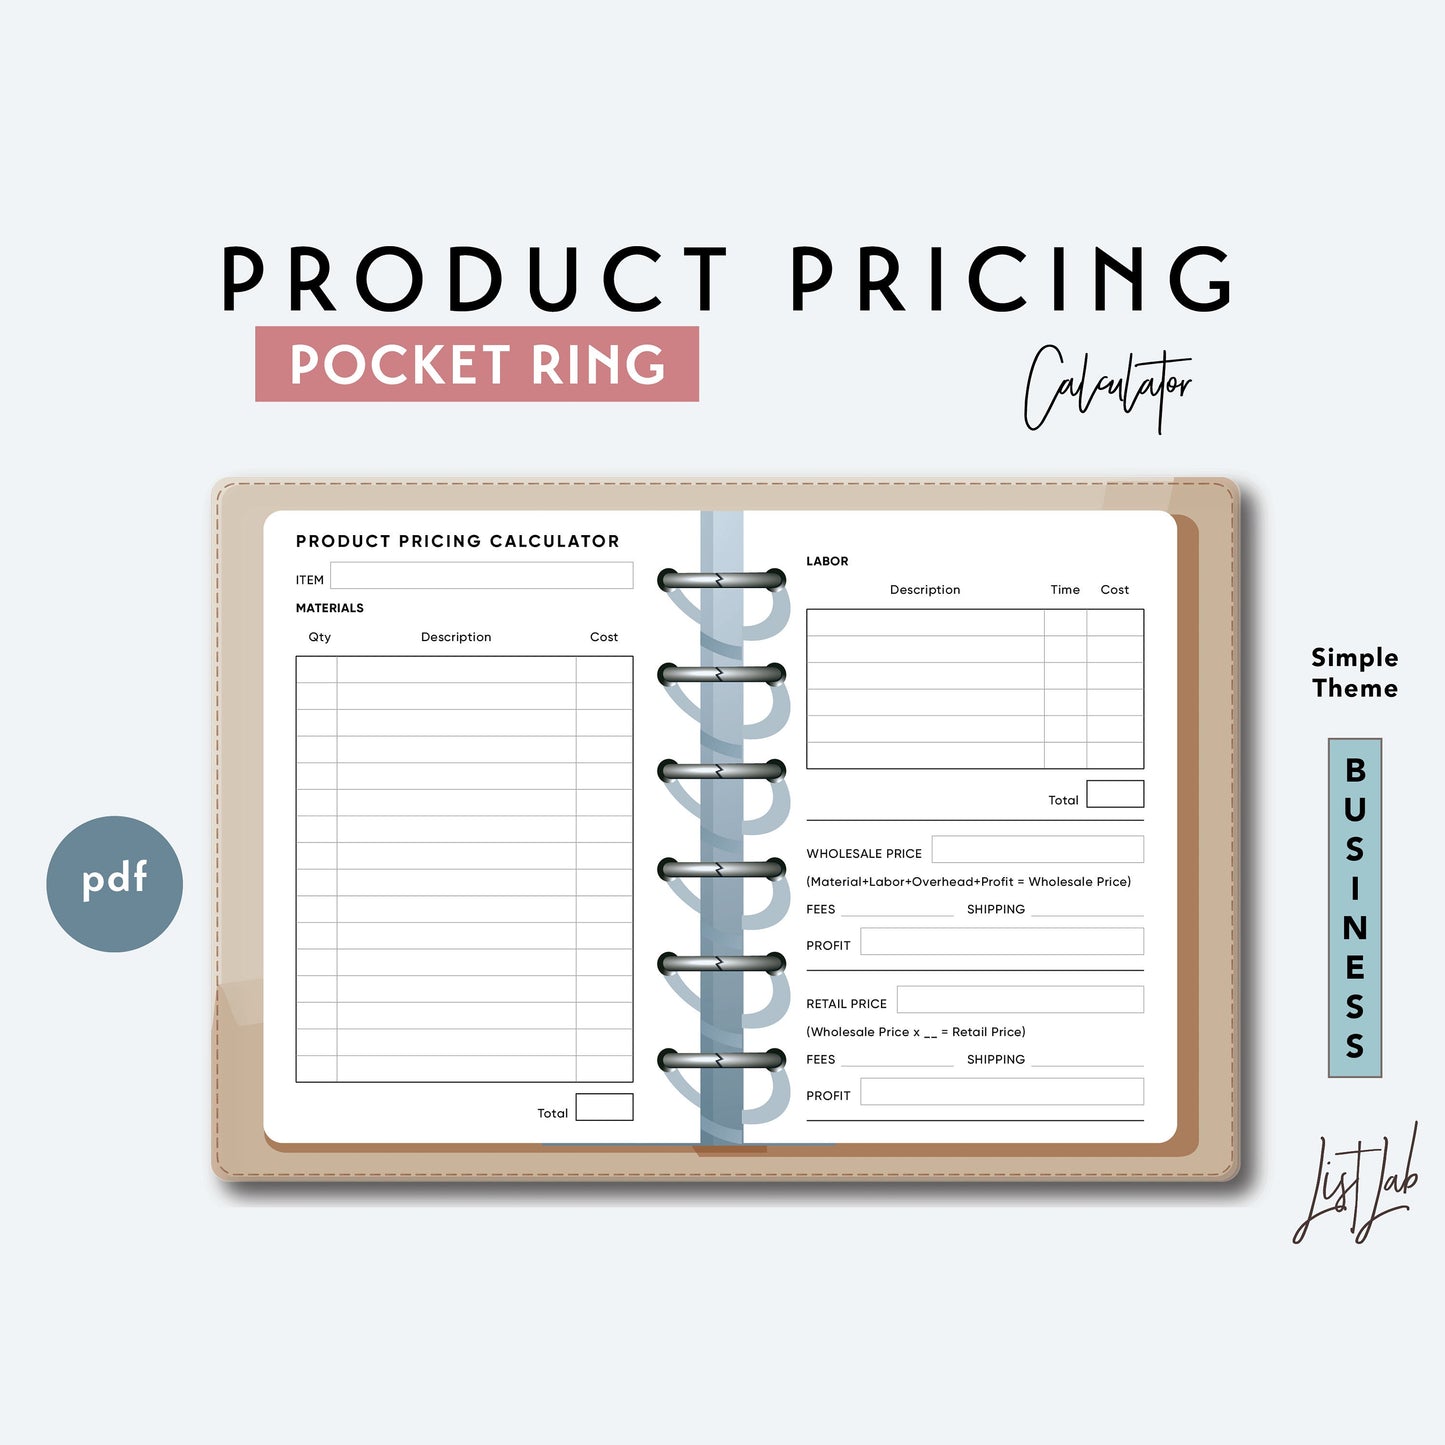 Pocket Ring PRODUCT PRICING CALCULATOR Printable Insert Set